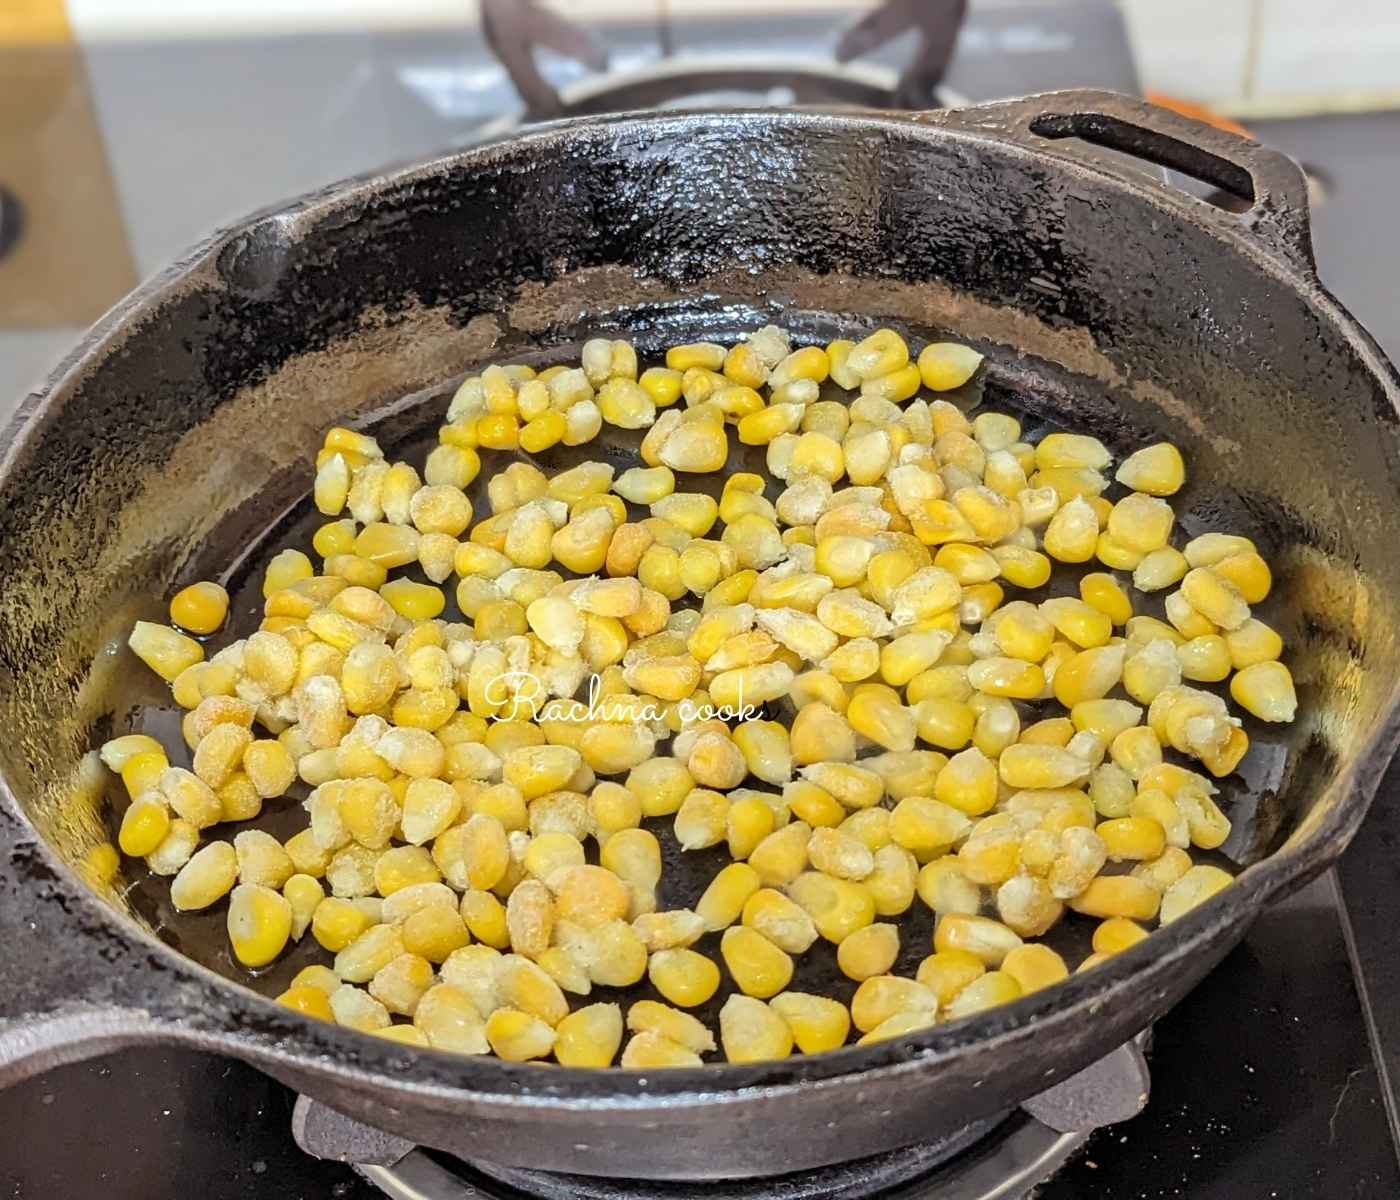 Frozen corn spread out in a hot skillet